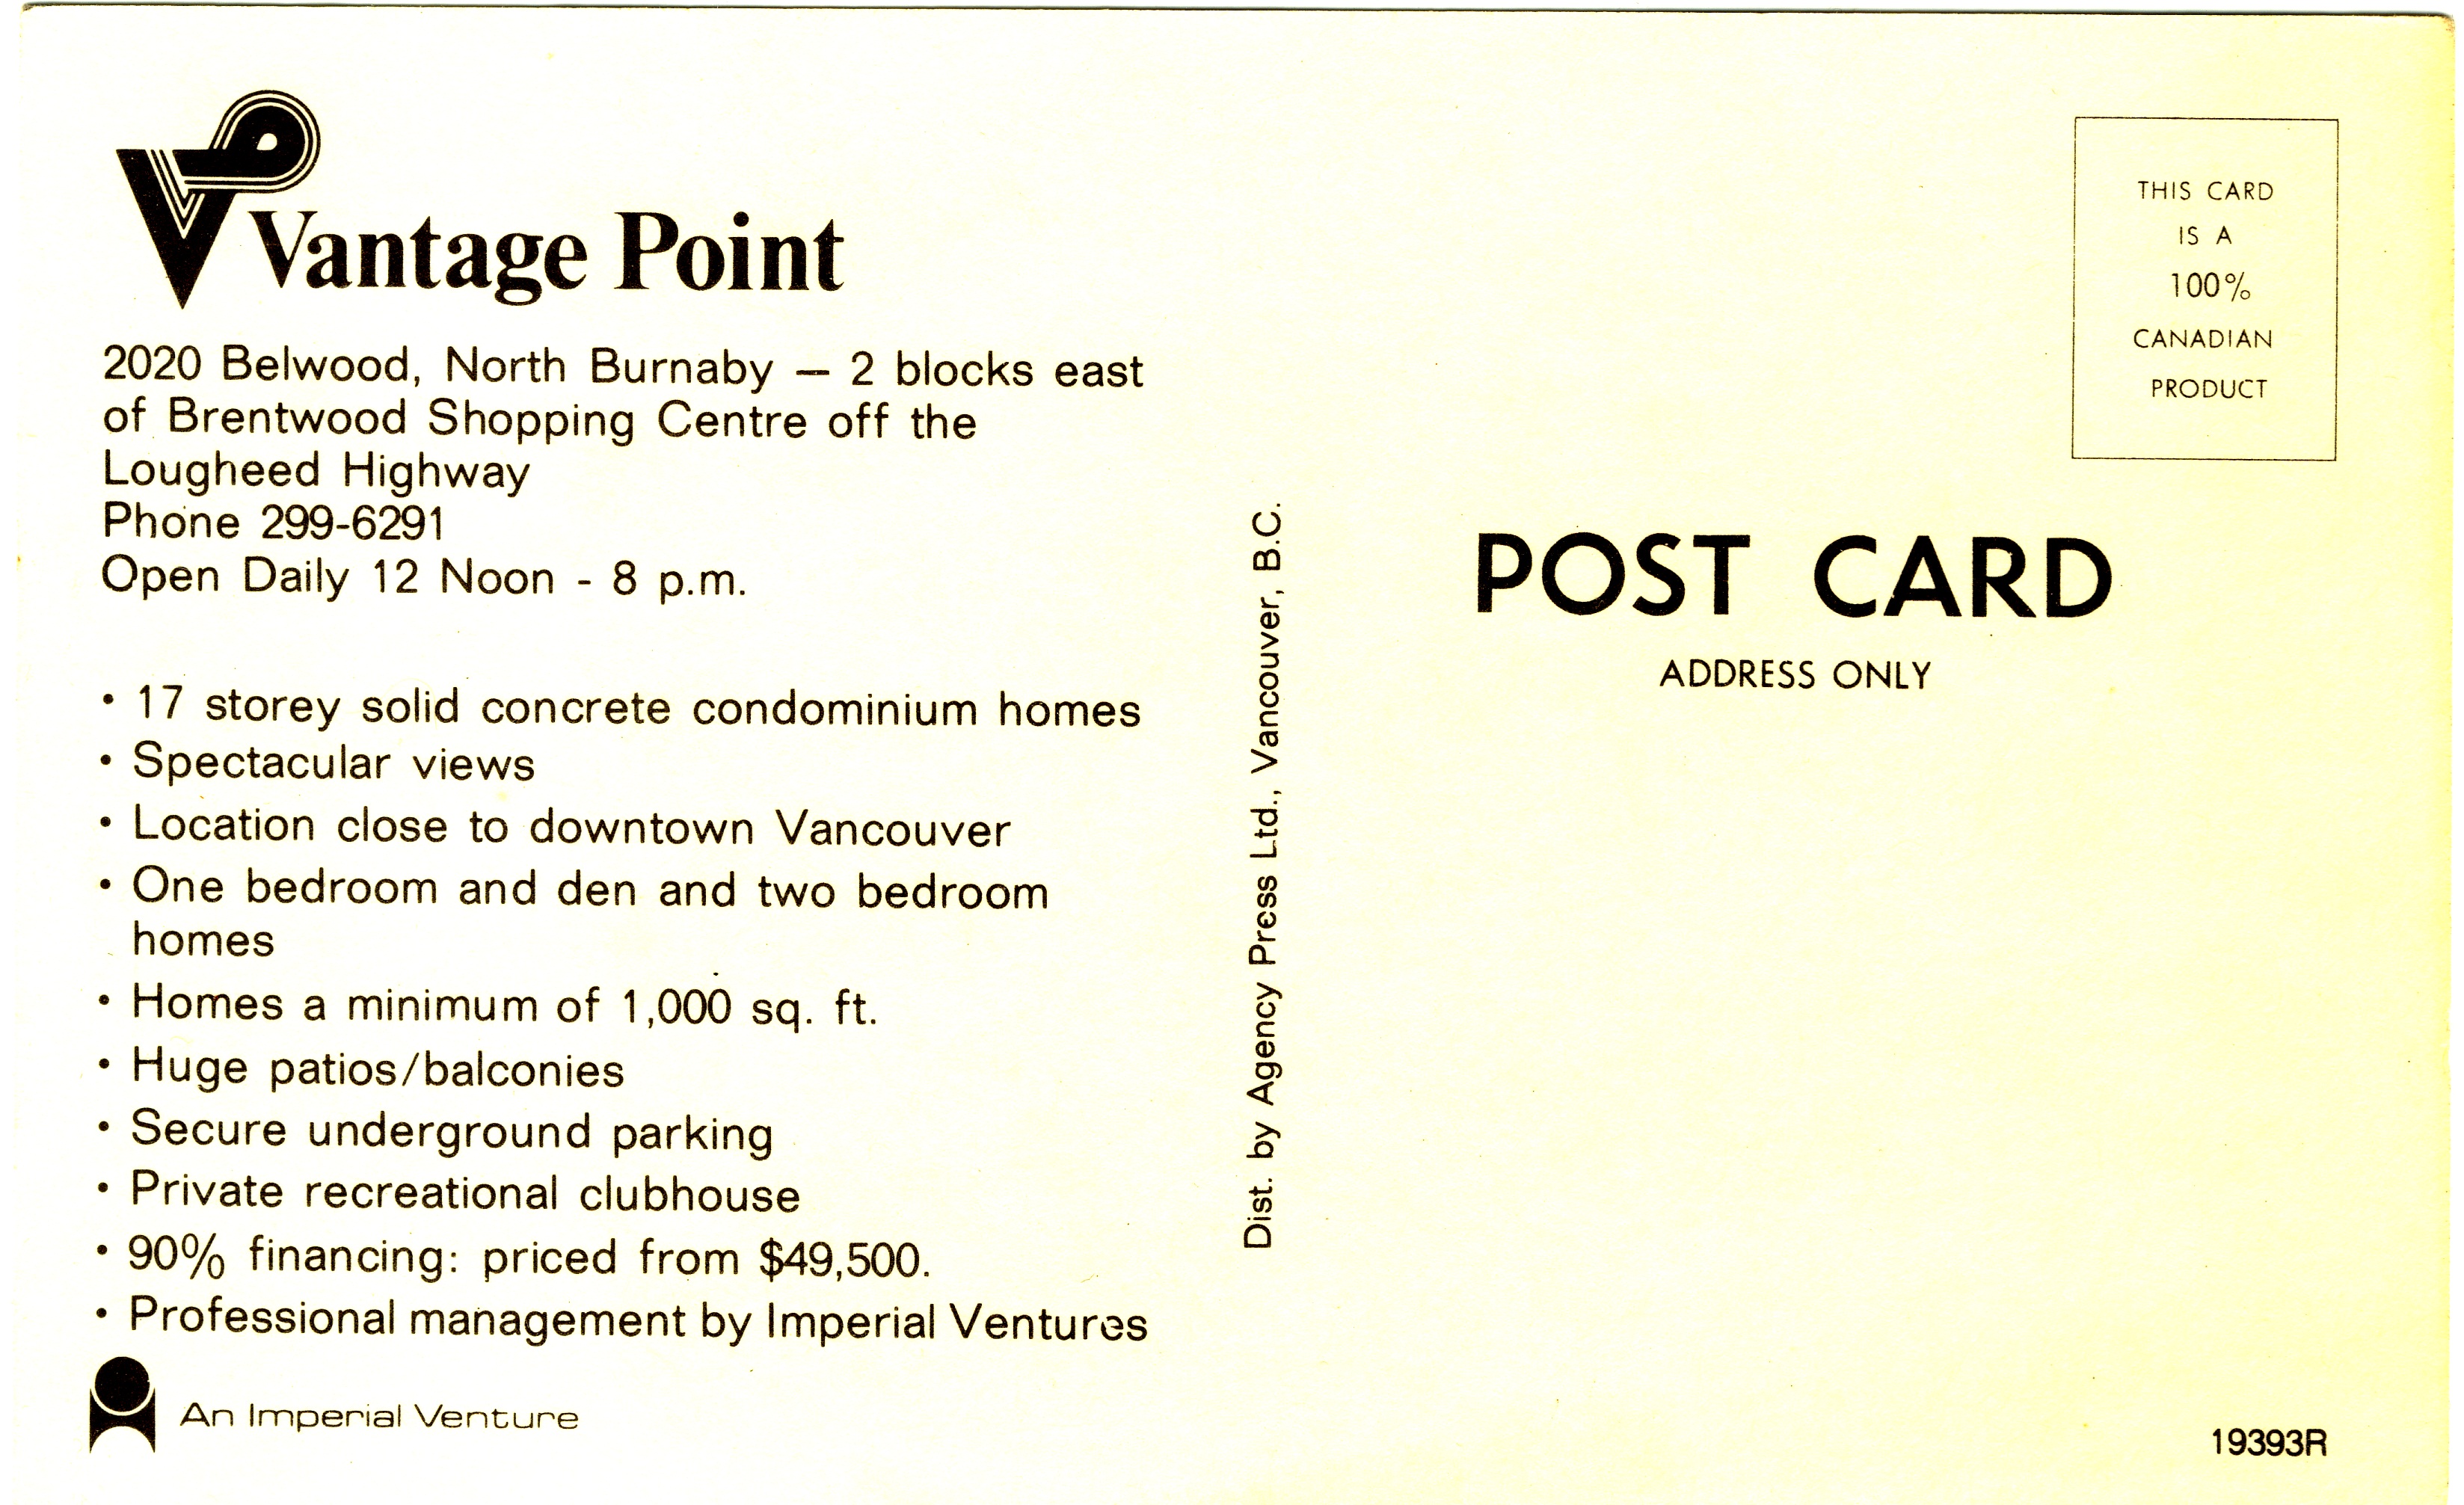 Vantage Point apartment towers, Burnaby, BC. Advertising postcard.